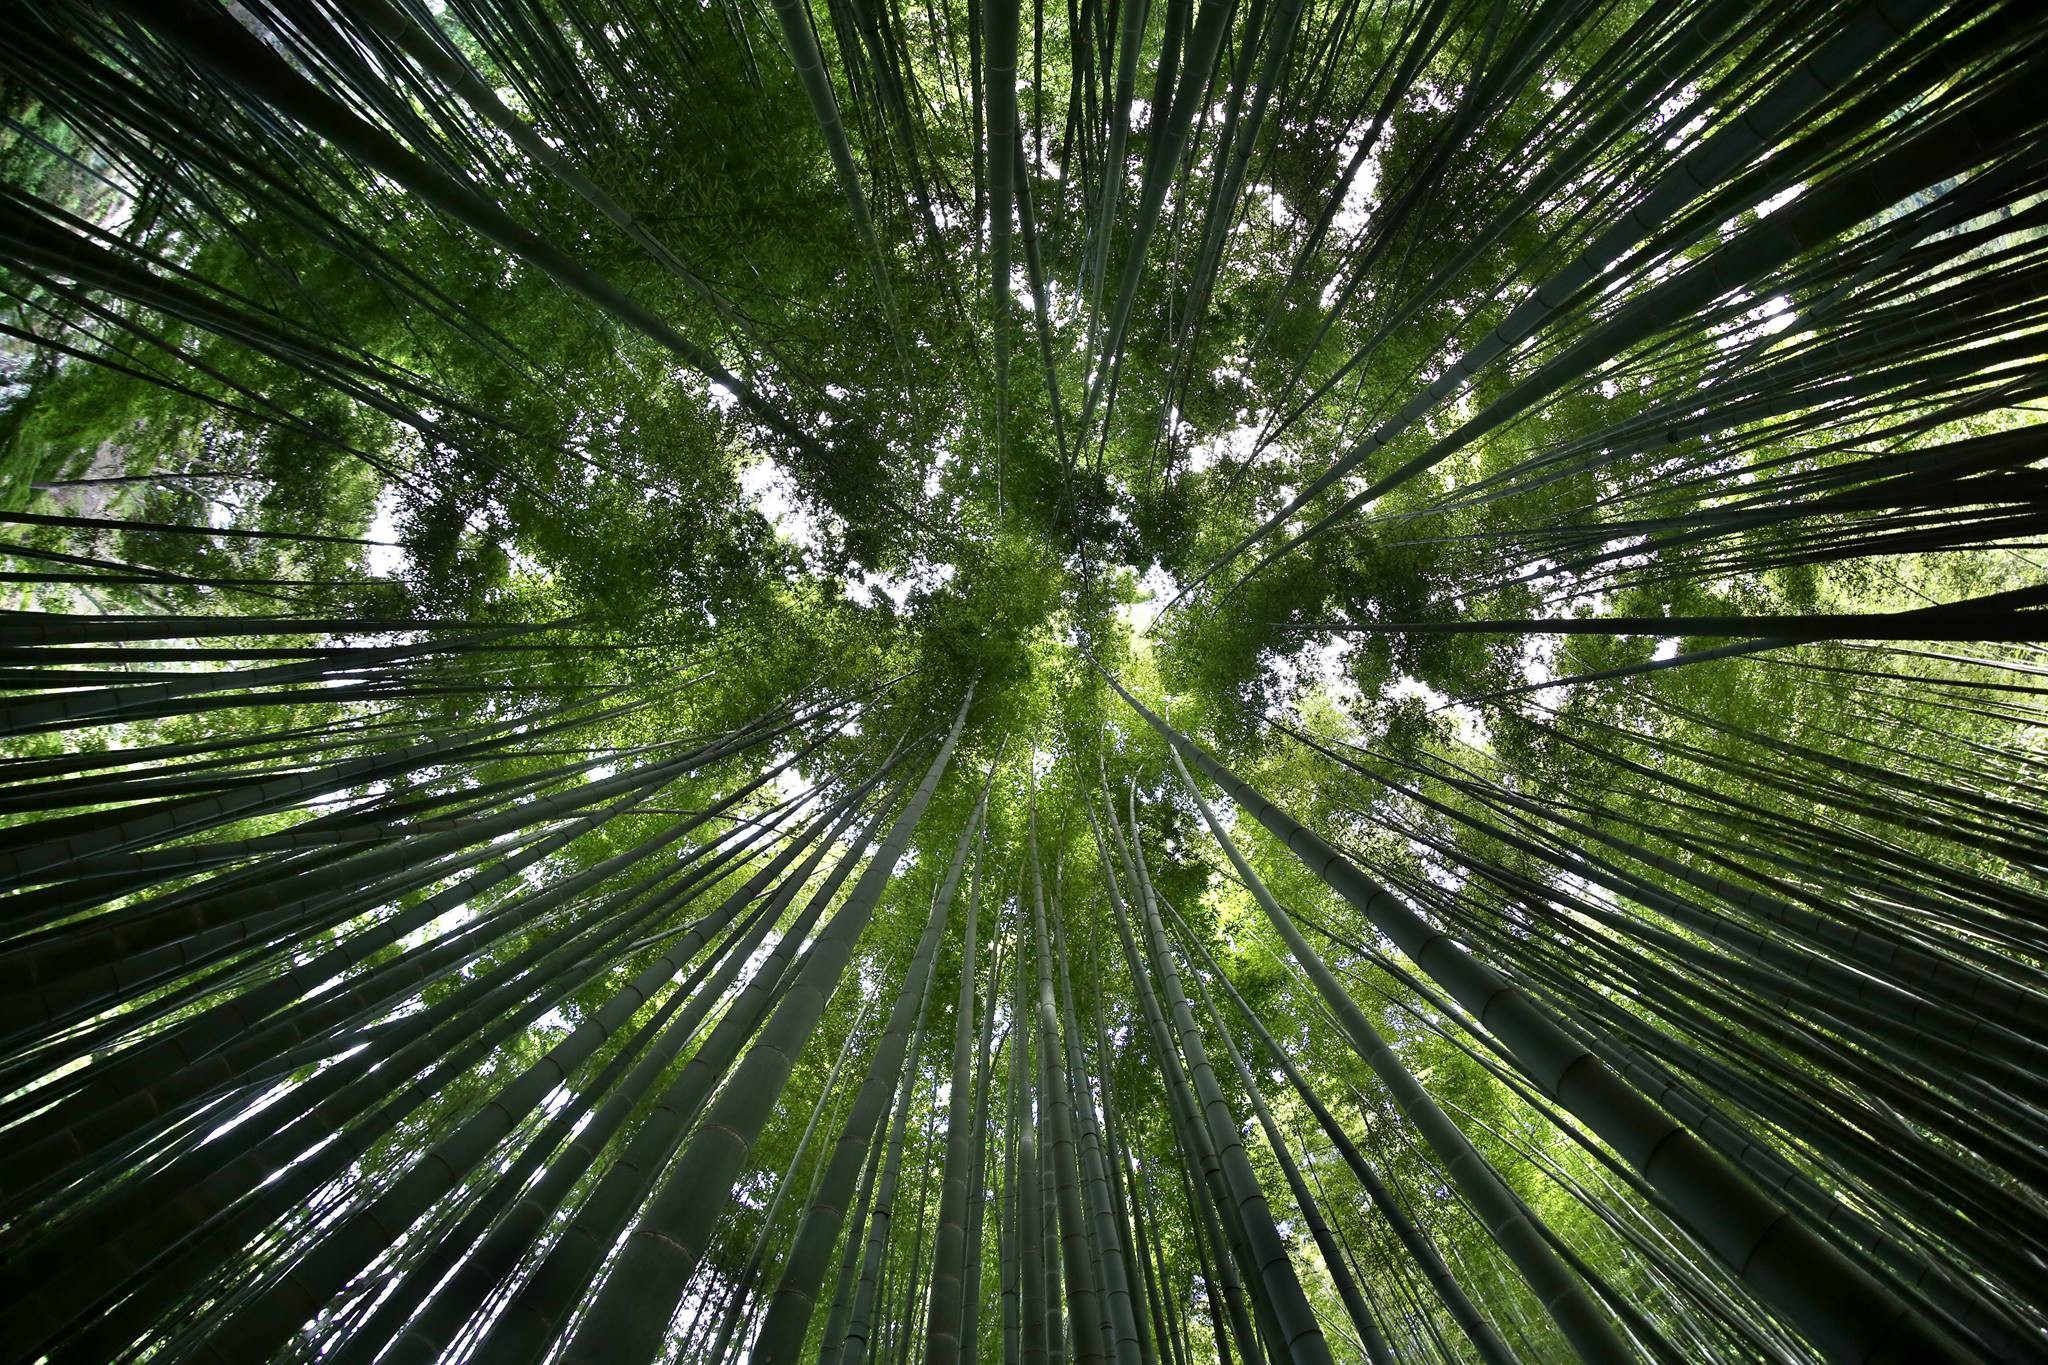 Bamboo Japan Worms Eye View Trees Nature Plants Bottom View 2048x1365